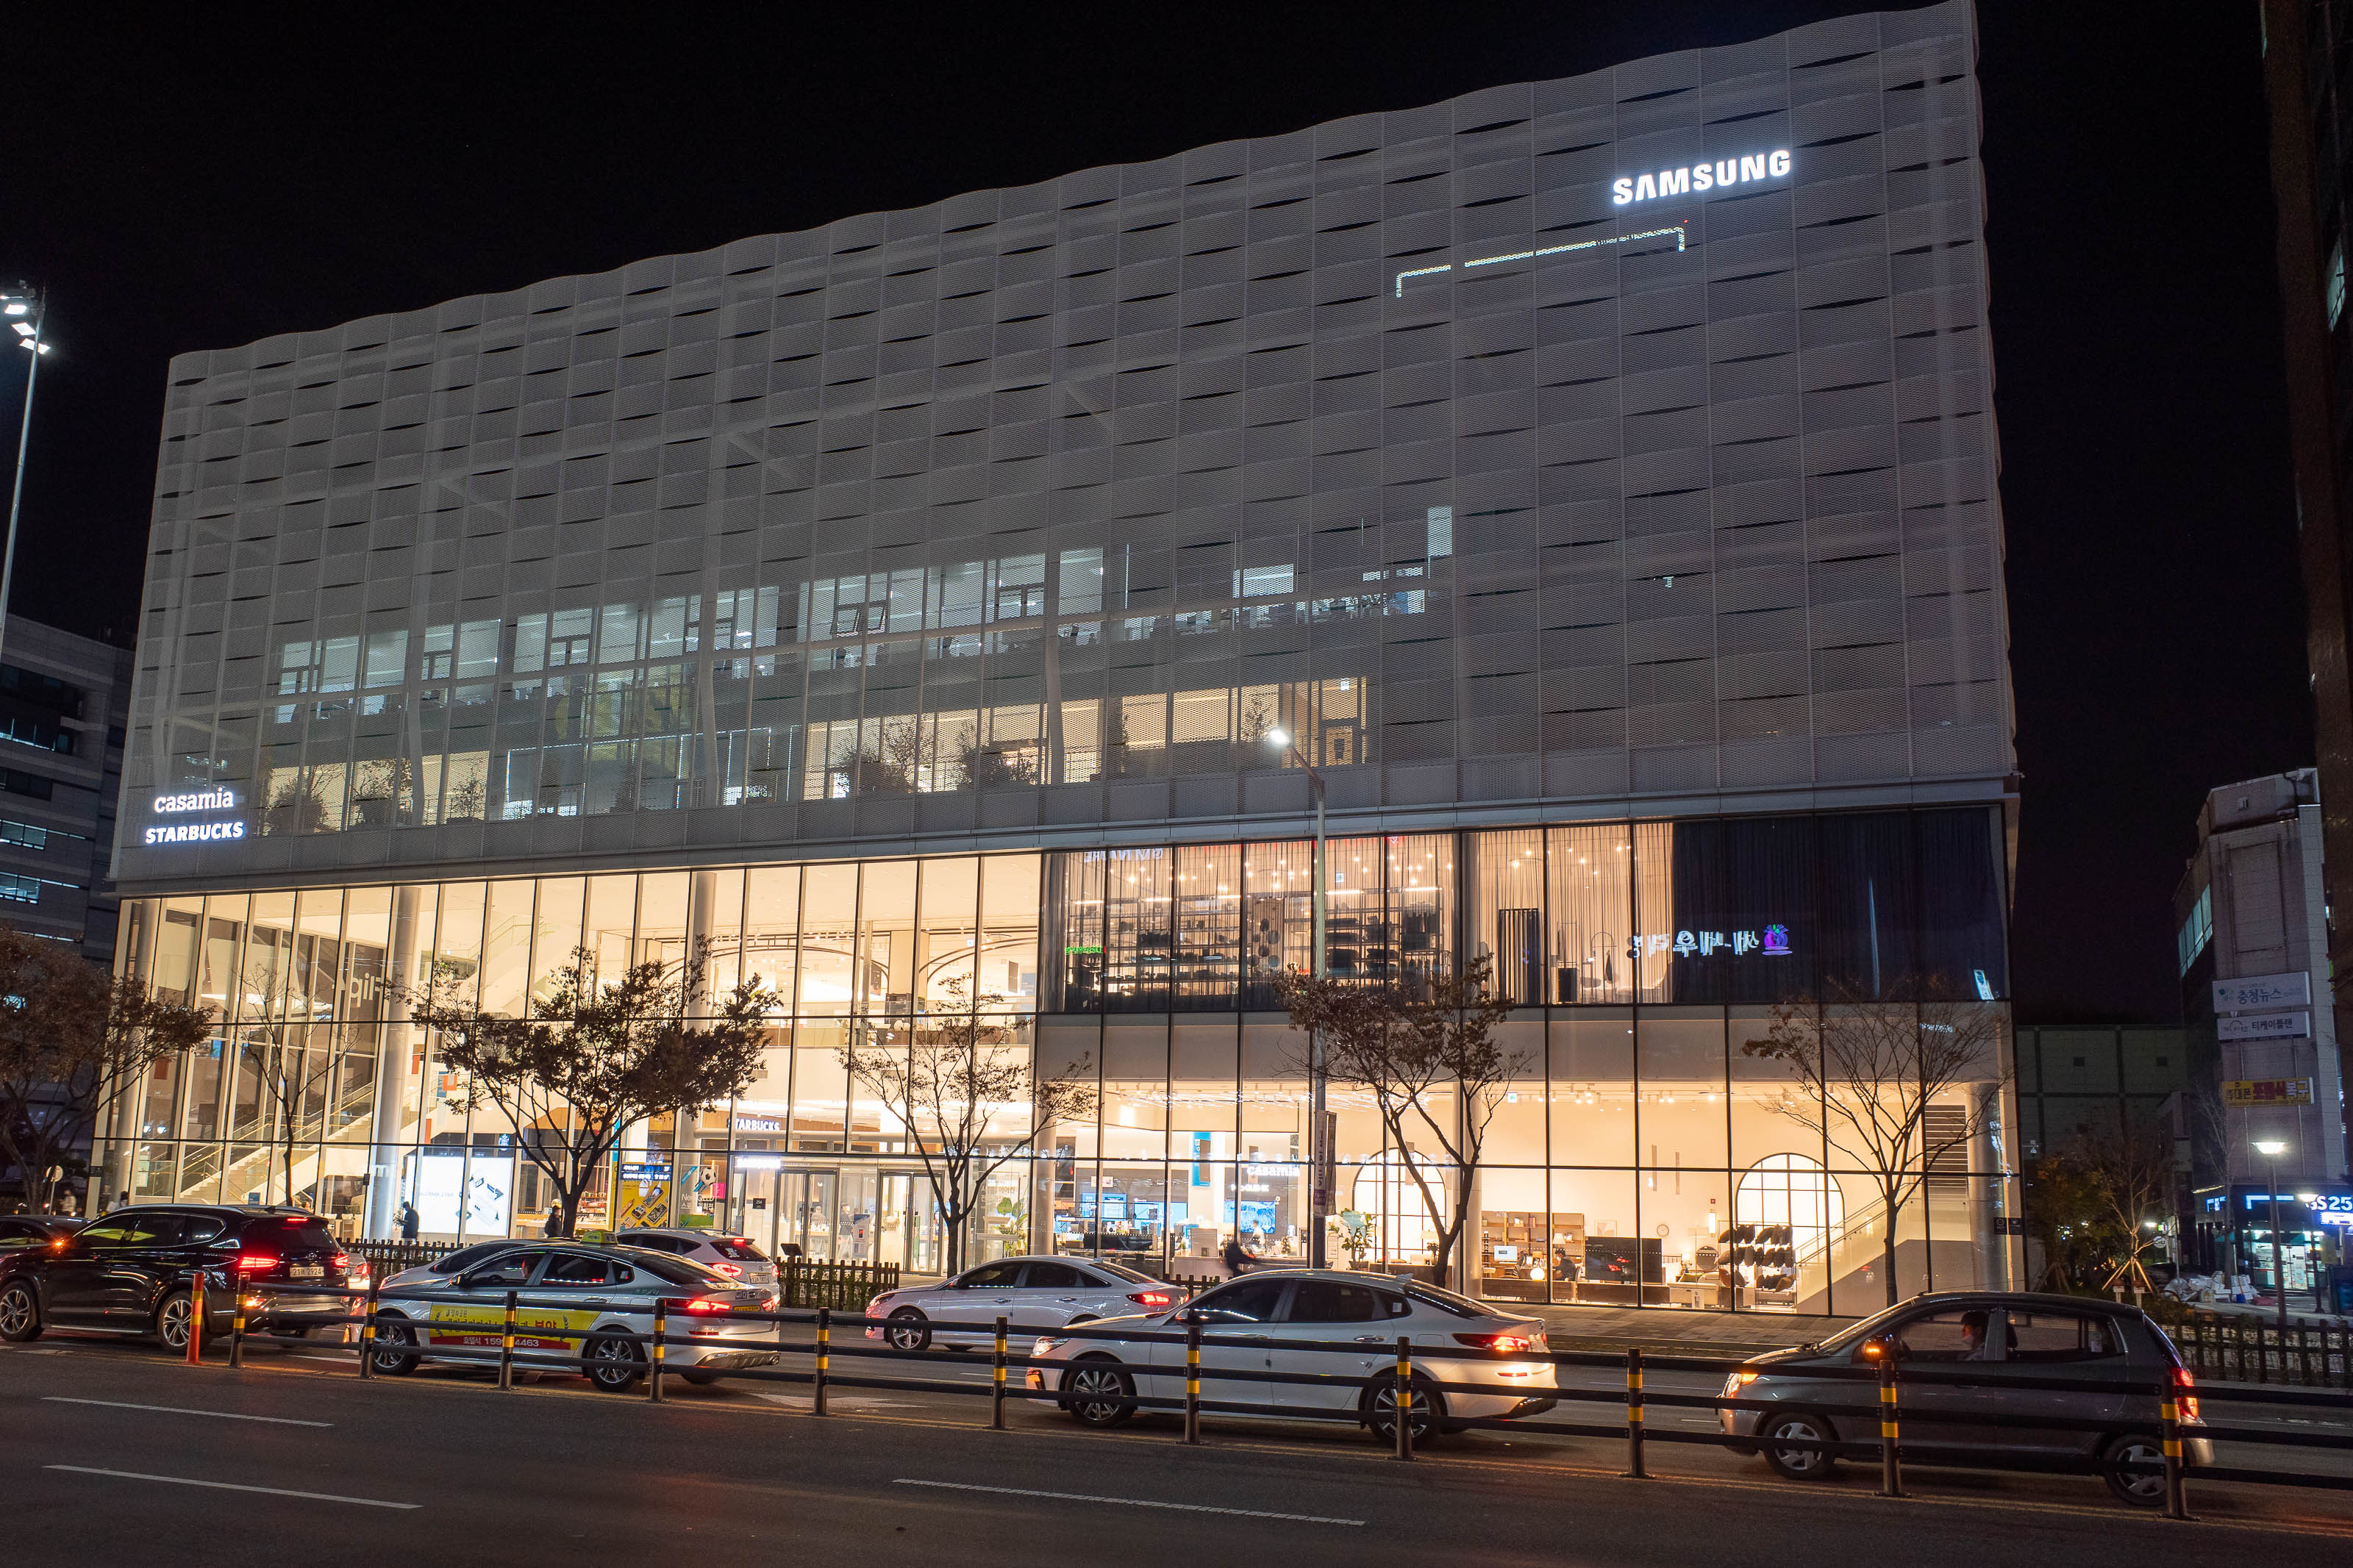 Korea-Daejeon-Dunsan - This is just your average Samsung store in Korea.